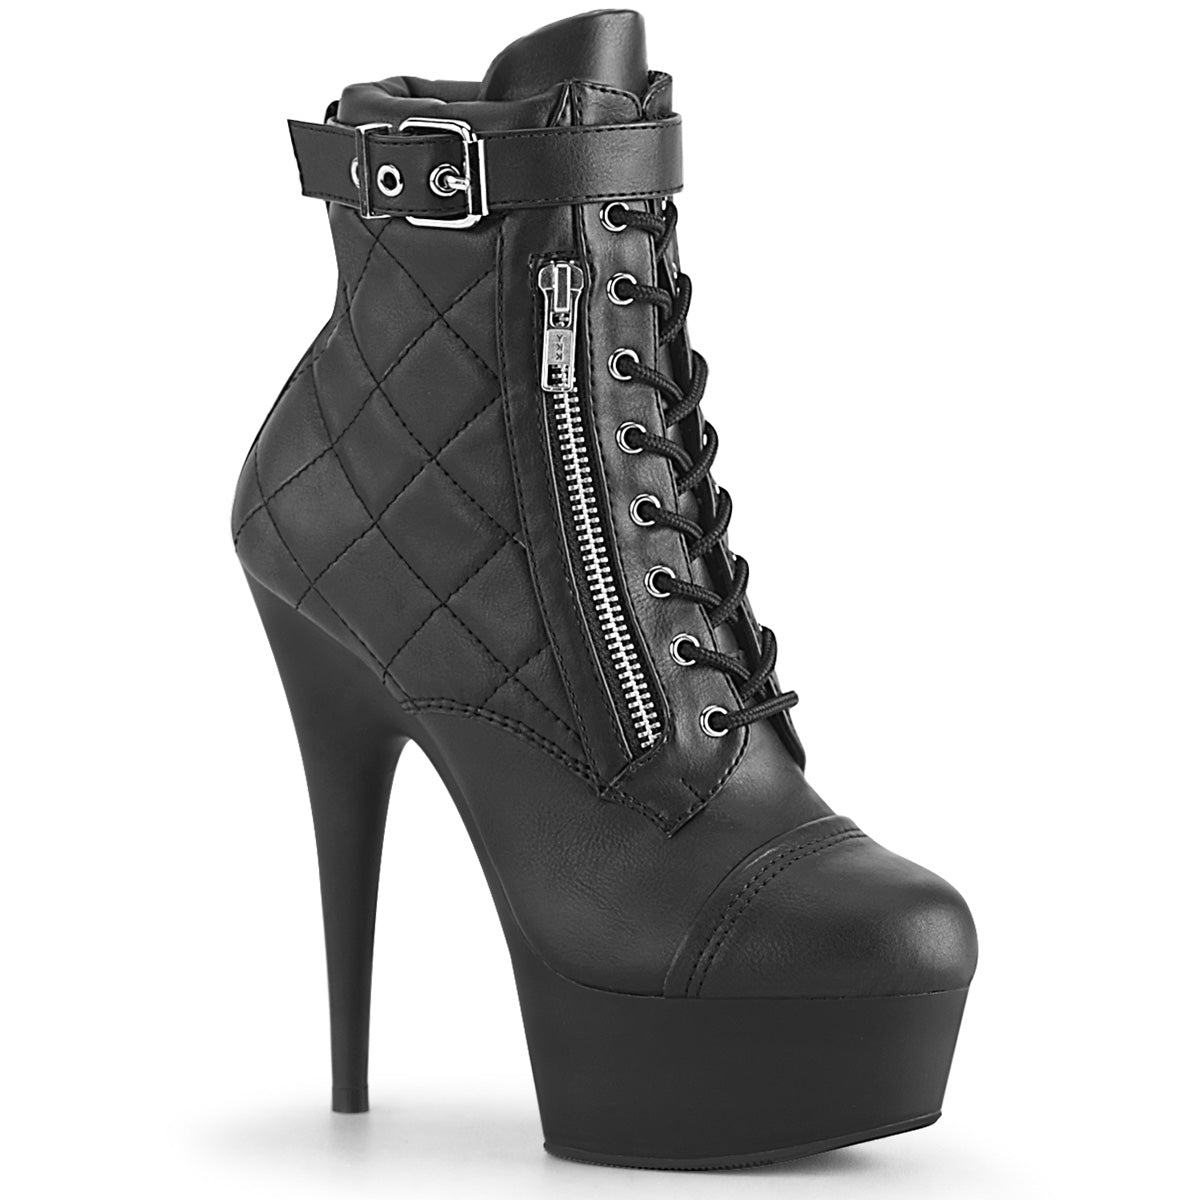 Delight 600-5 Black Quilted Lace Up Platform Ankle Boots - 6" High Heels